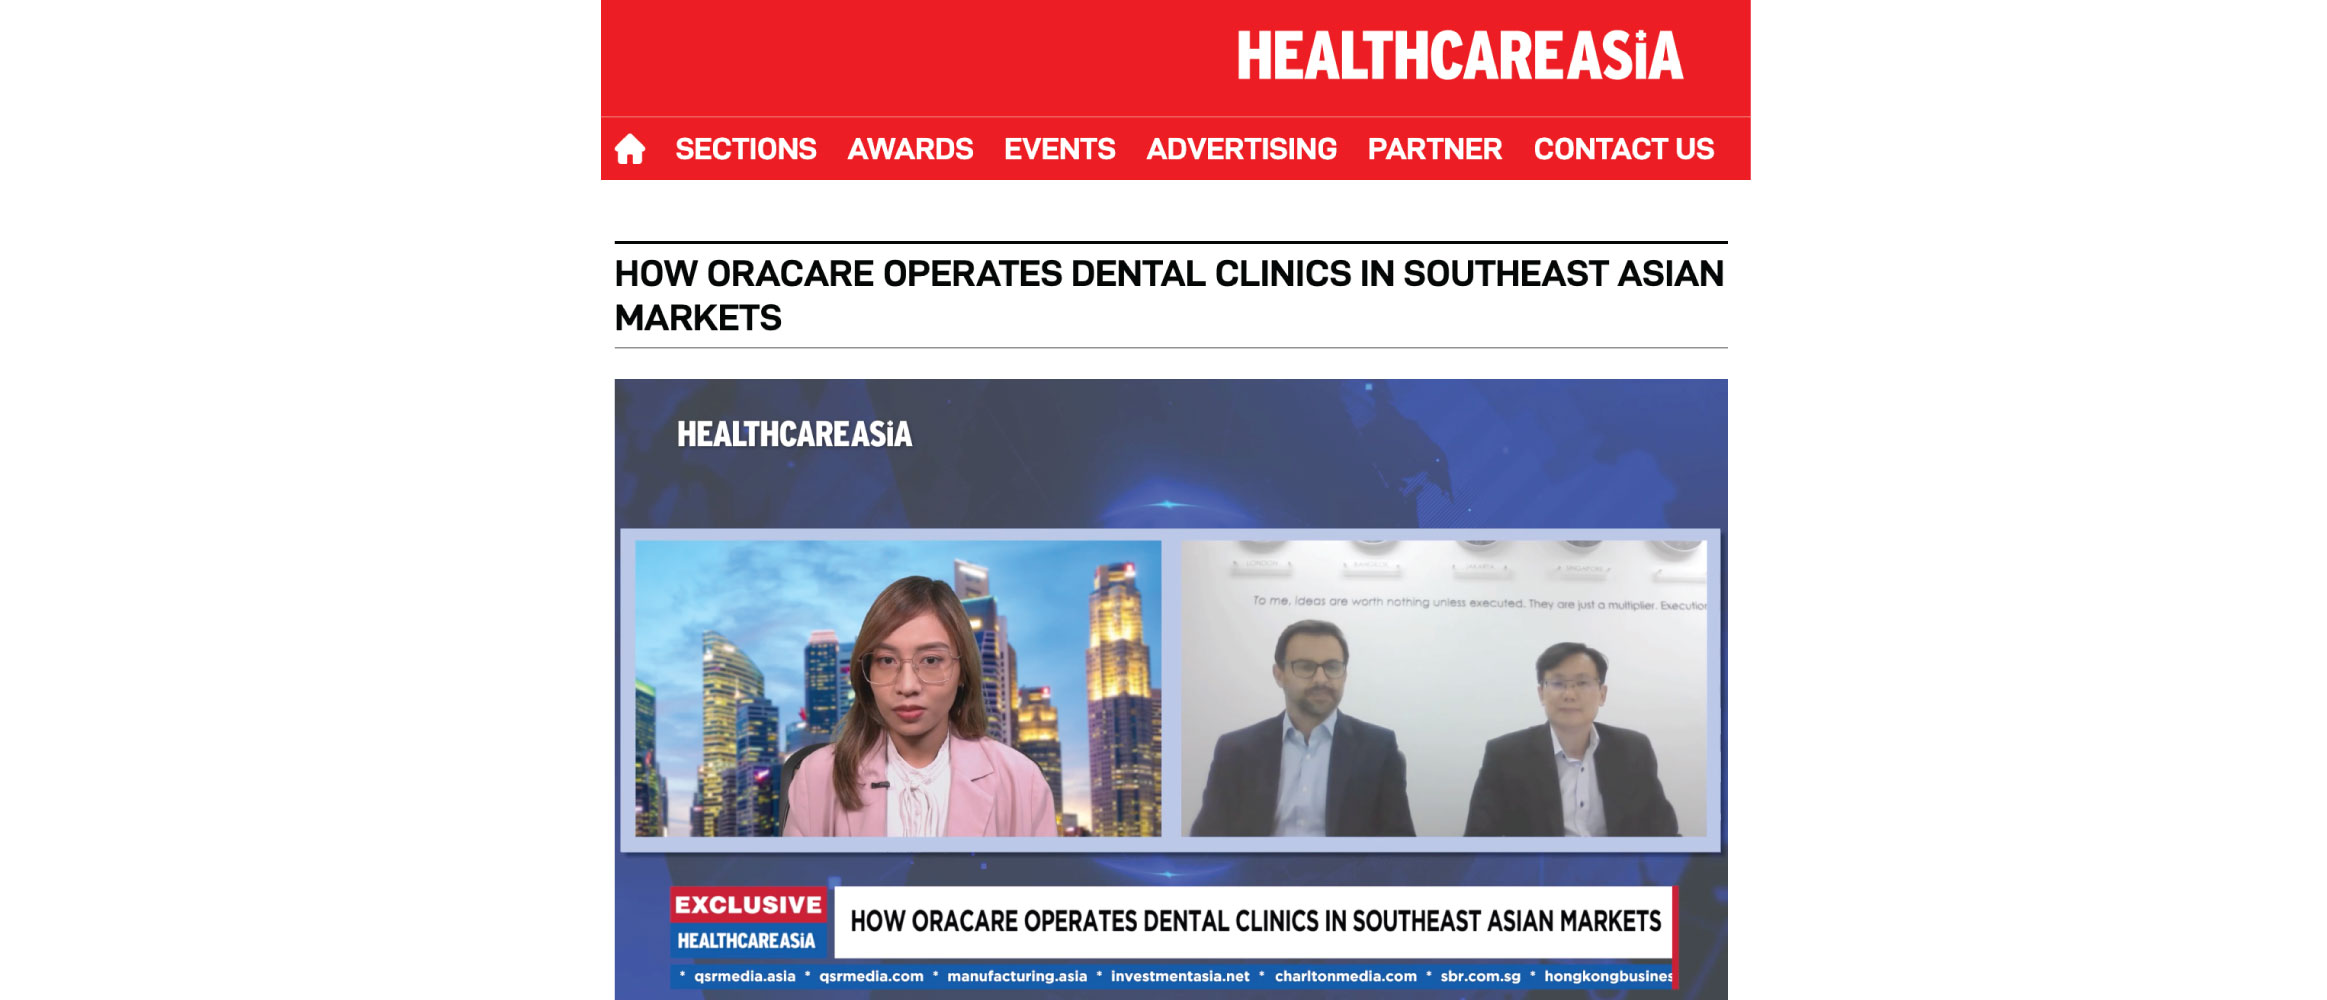 How Oracare operates dental clinics in Southeast Asian markets